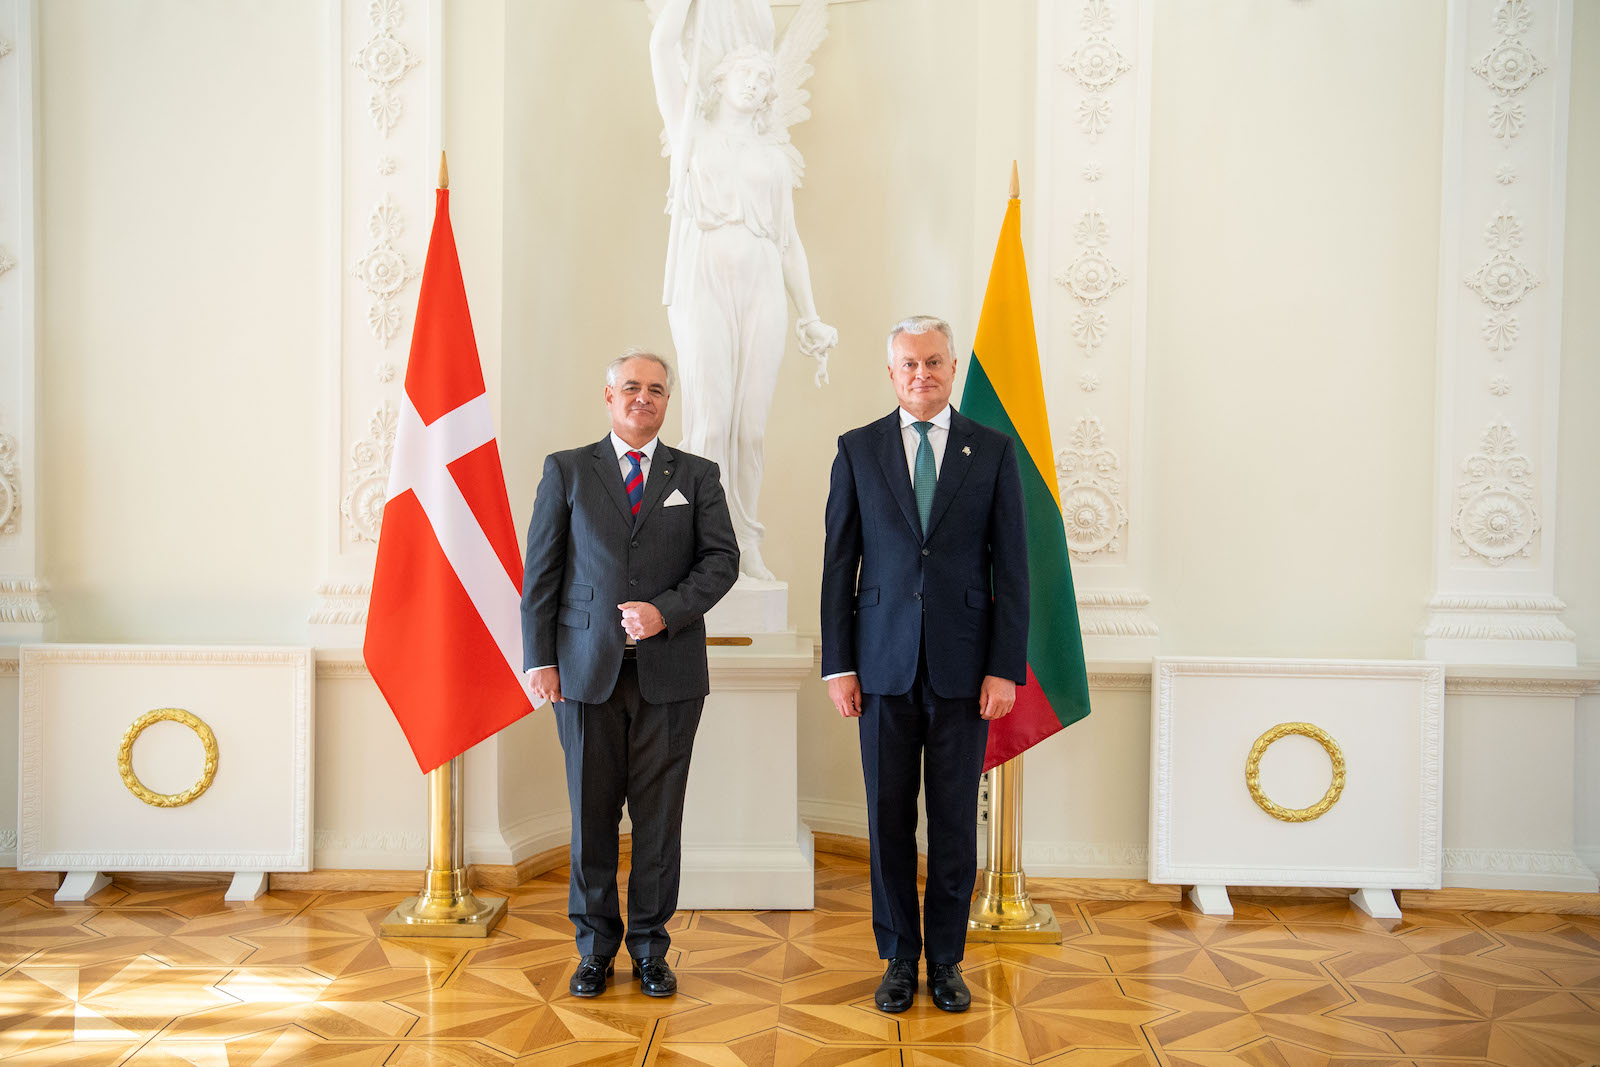 The Ambassador of the Sovereign Order of Malta to Lithuania presents his letters of credence